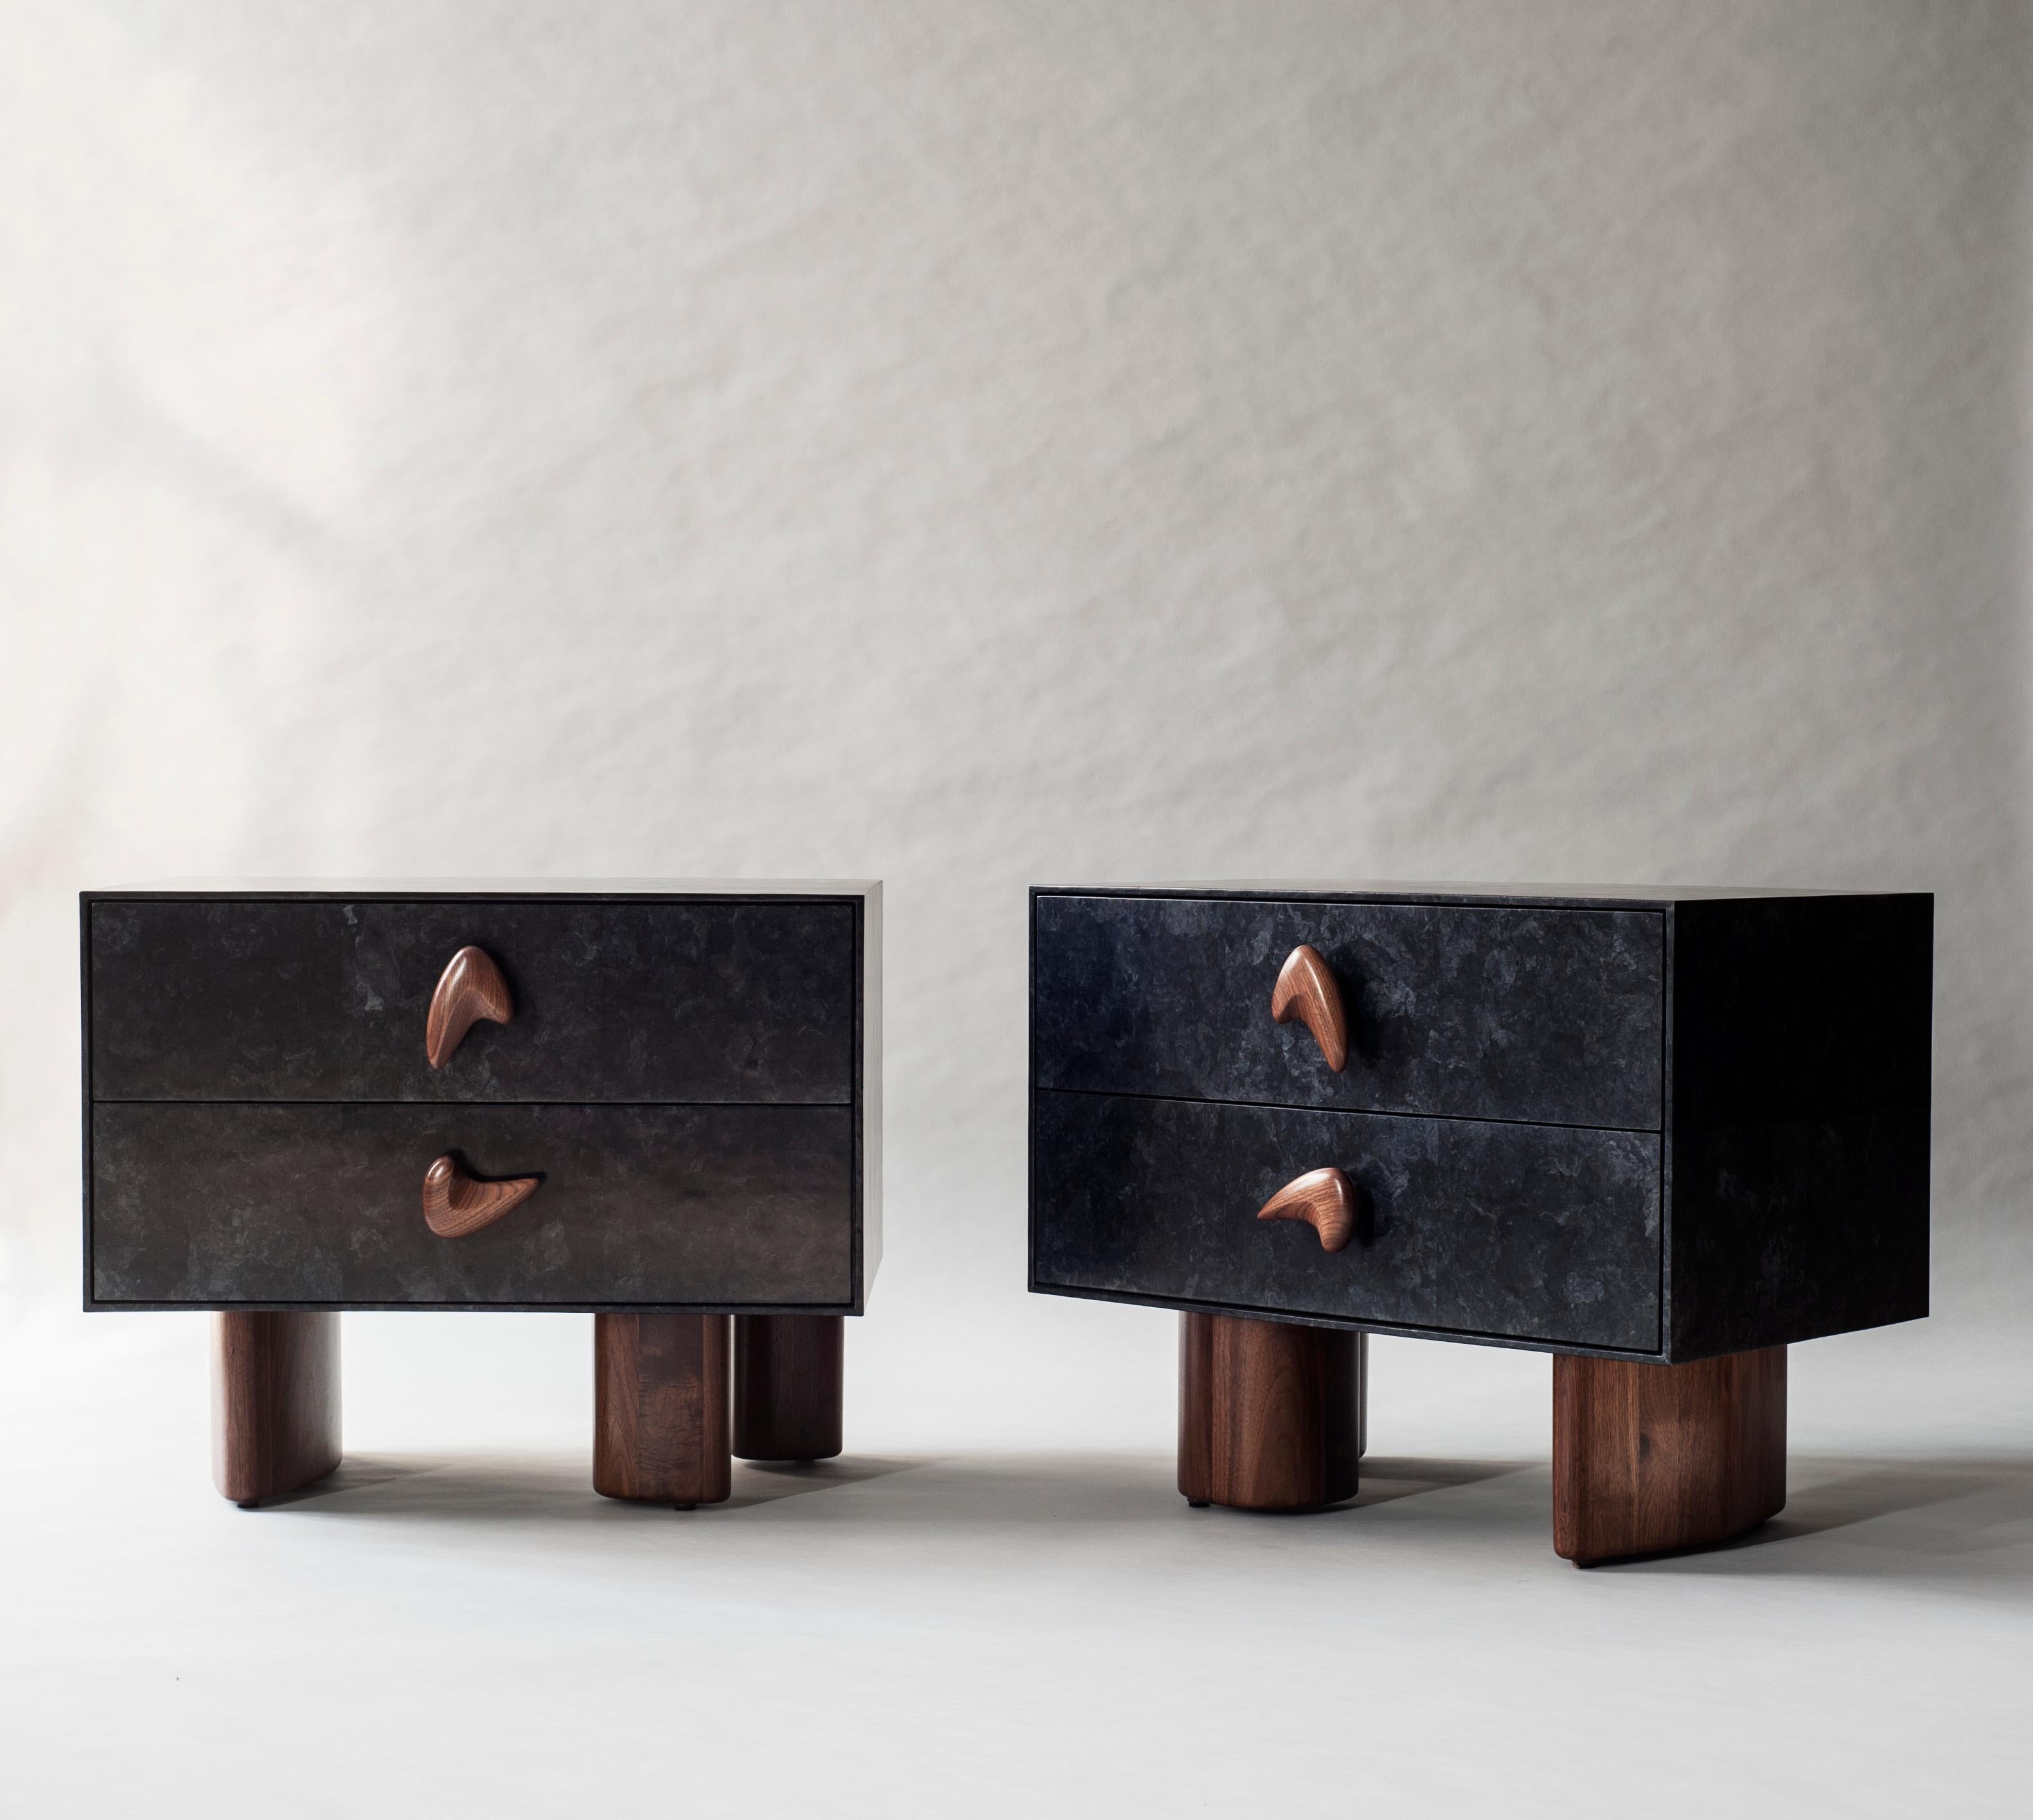 Set of 2 corbu bedside table by DeMuro Das 
Dimensions: W 76 x D 50.2 x H 61.5 cm
Materials: Solid walnut - Matte
 Carta (Coal) - Matte

Dimensions and finishes can be customized 

DeMuro Das is an international design firm and the aesthetic